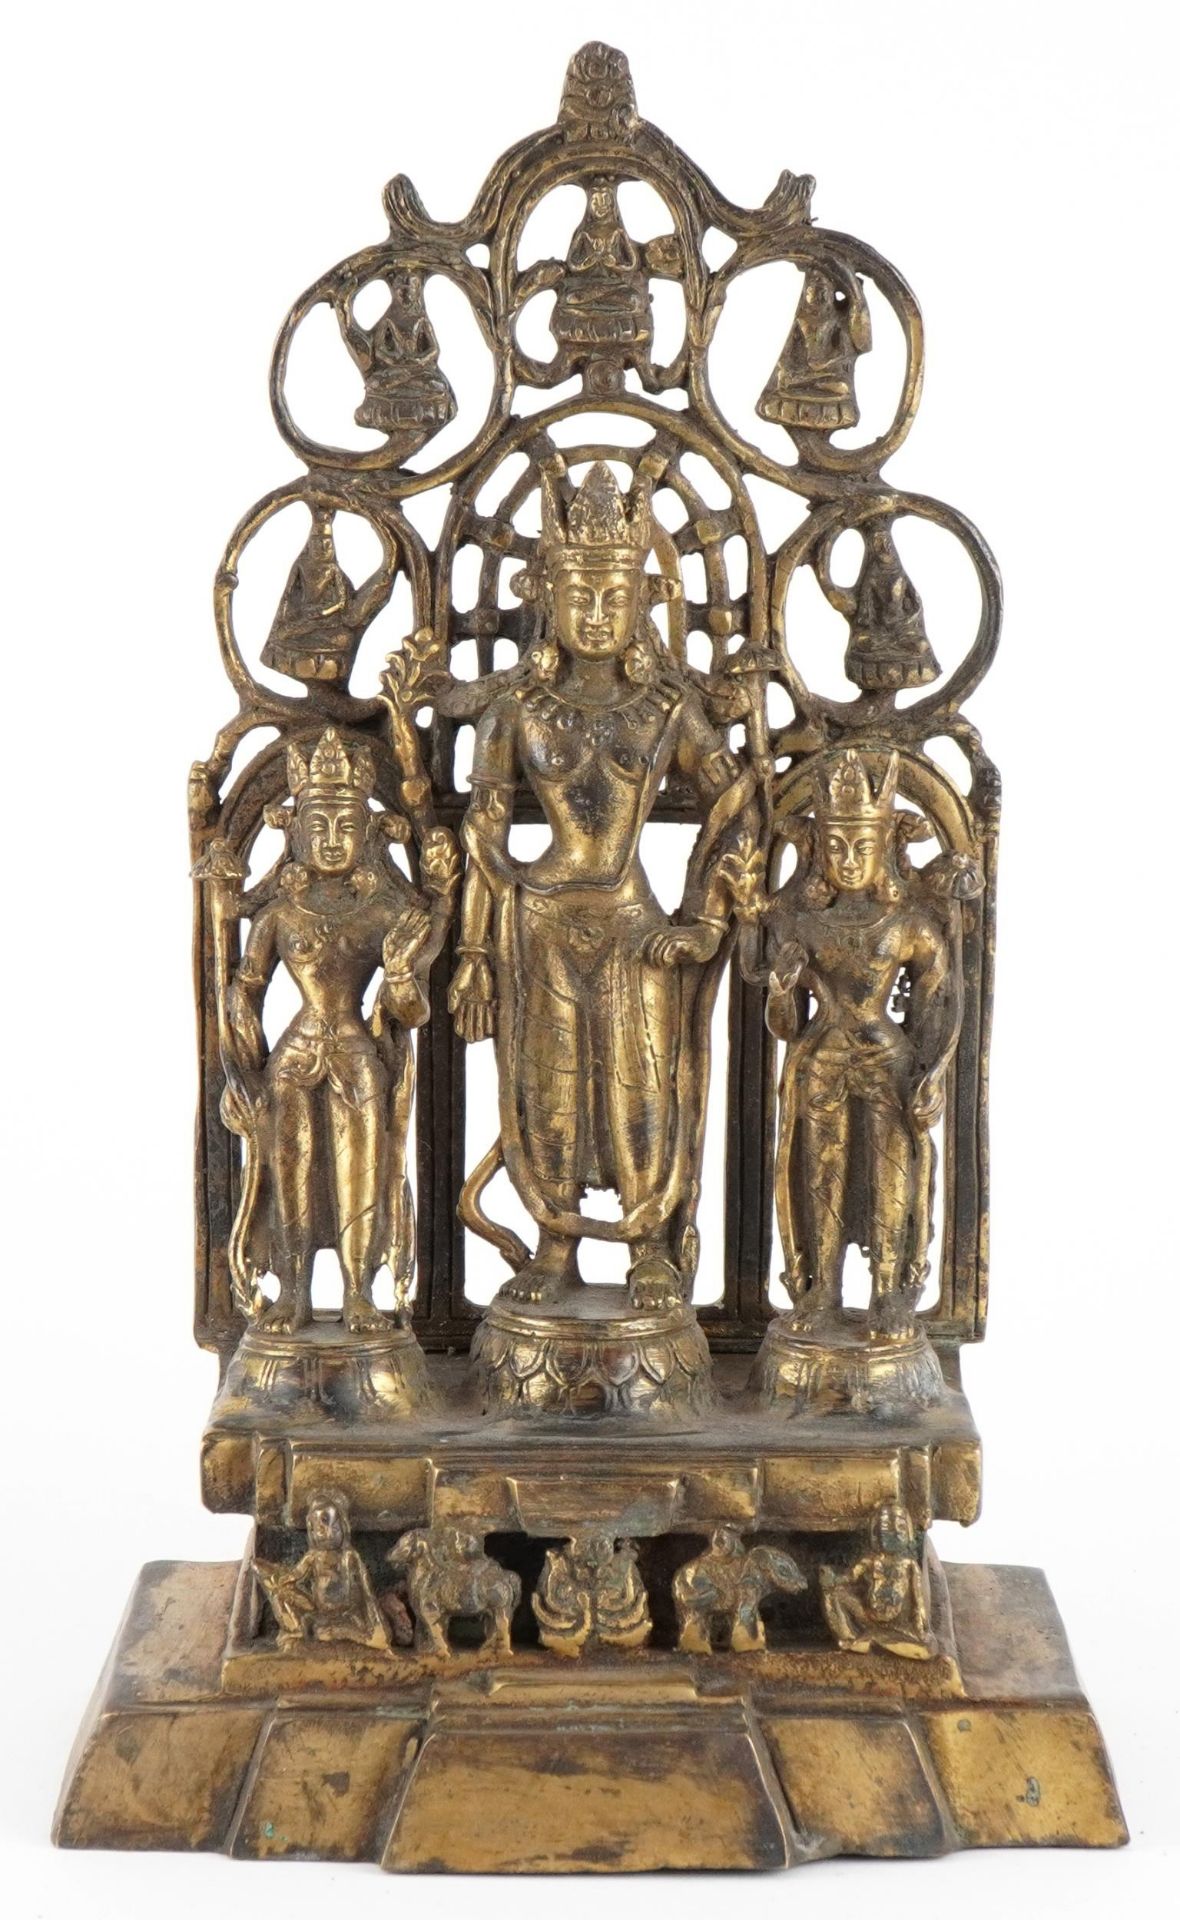 Chino Tibetan gilt bronze figure group of three deities, 28cm high : For further information on this